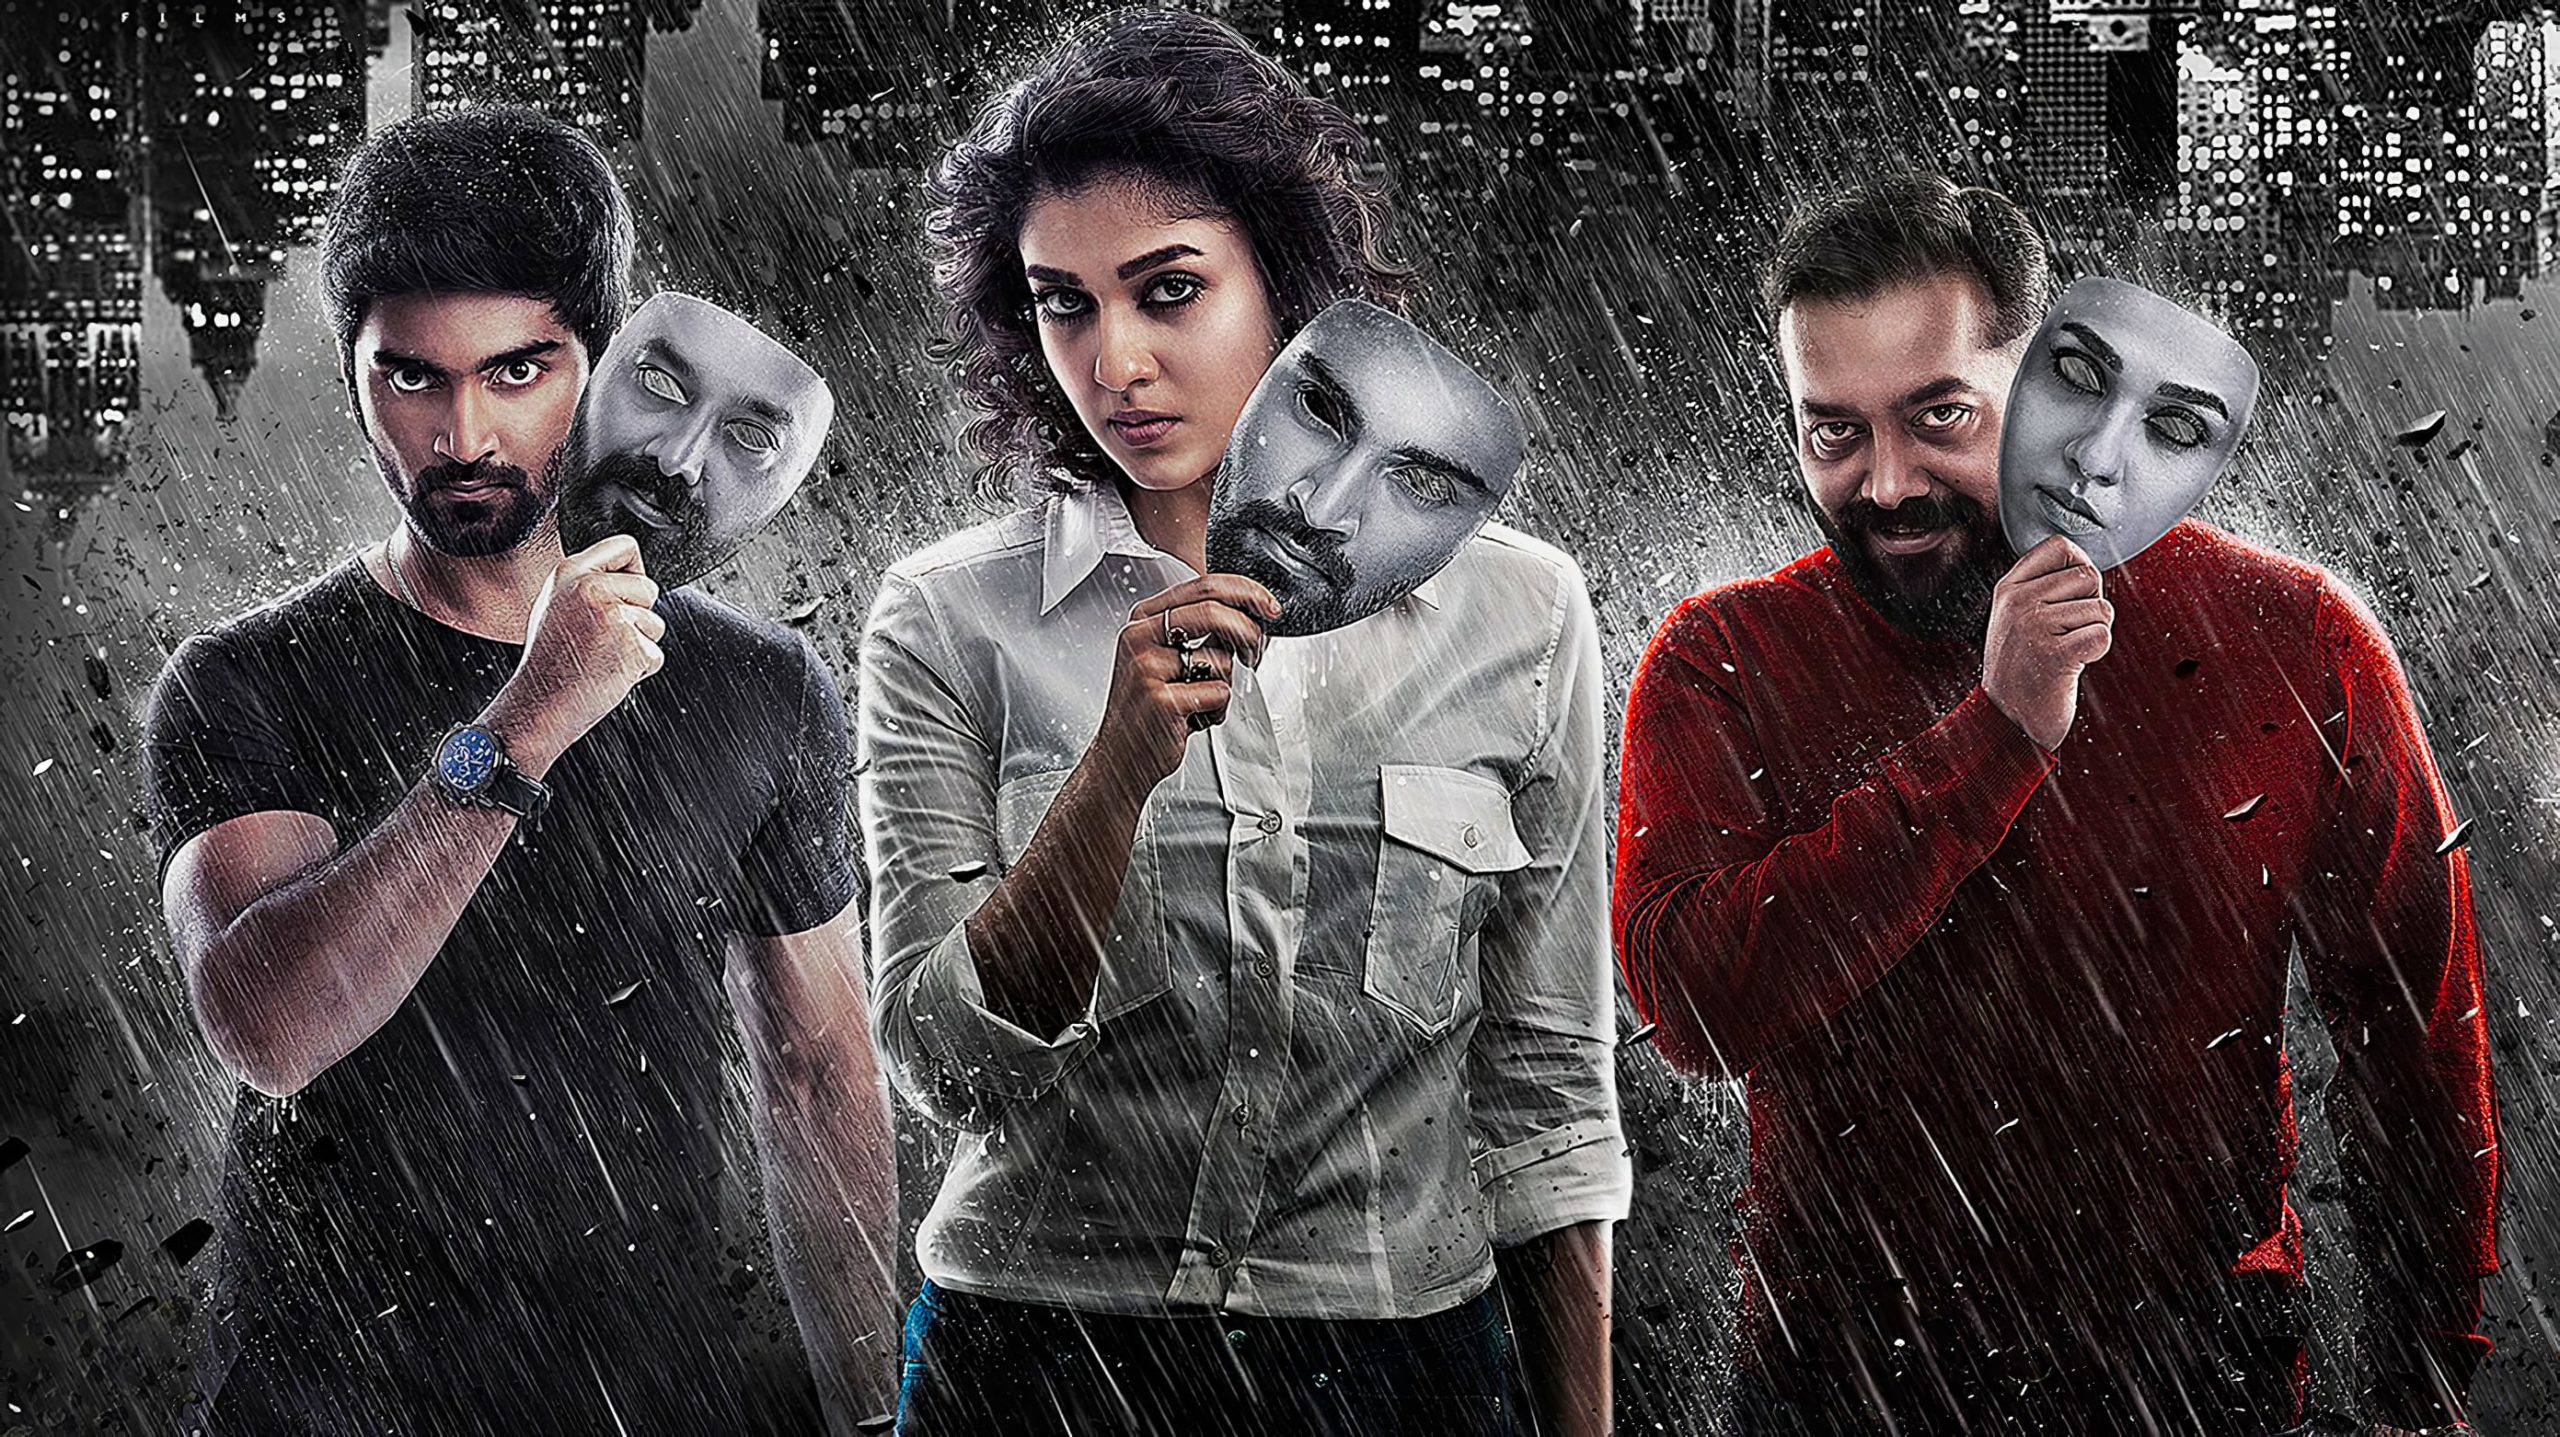 Watch Imaikkaa Nodigal Full Movie Online For Free In HD Quality